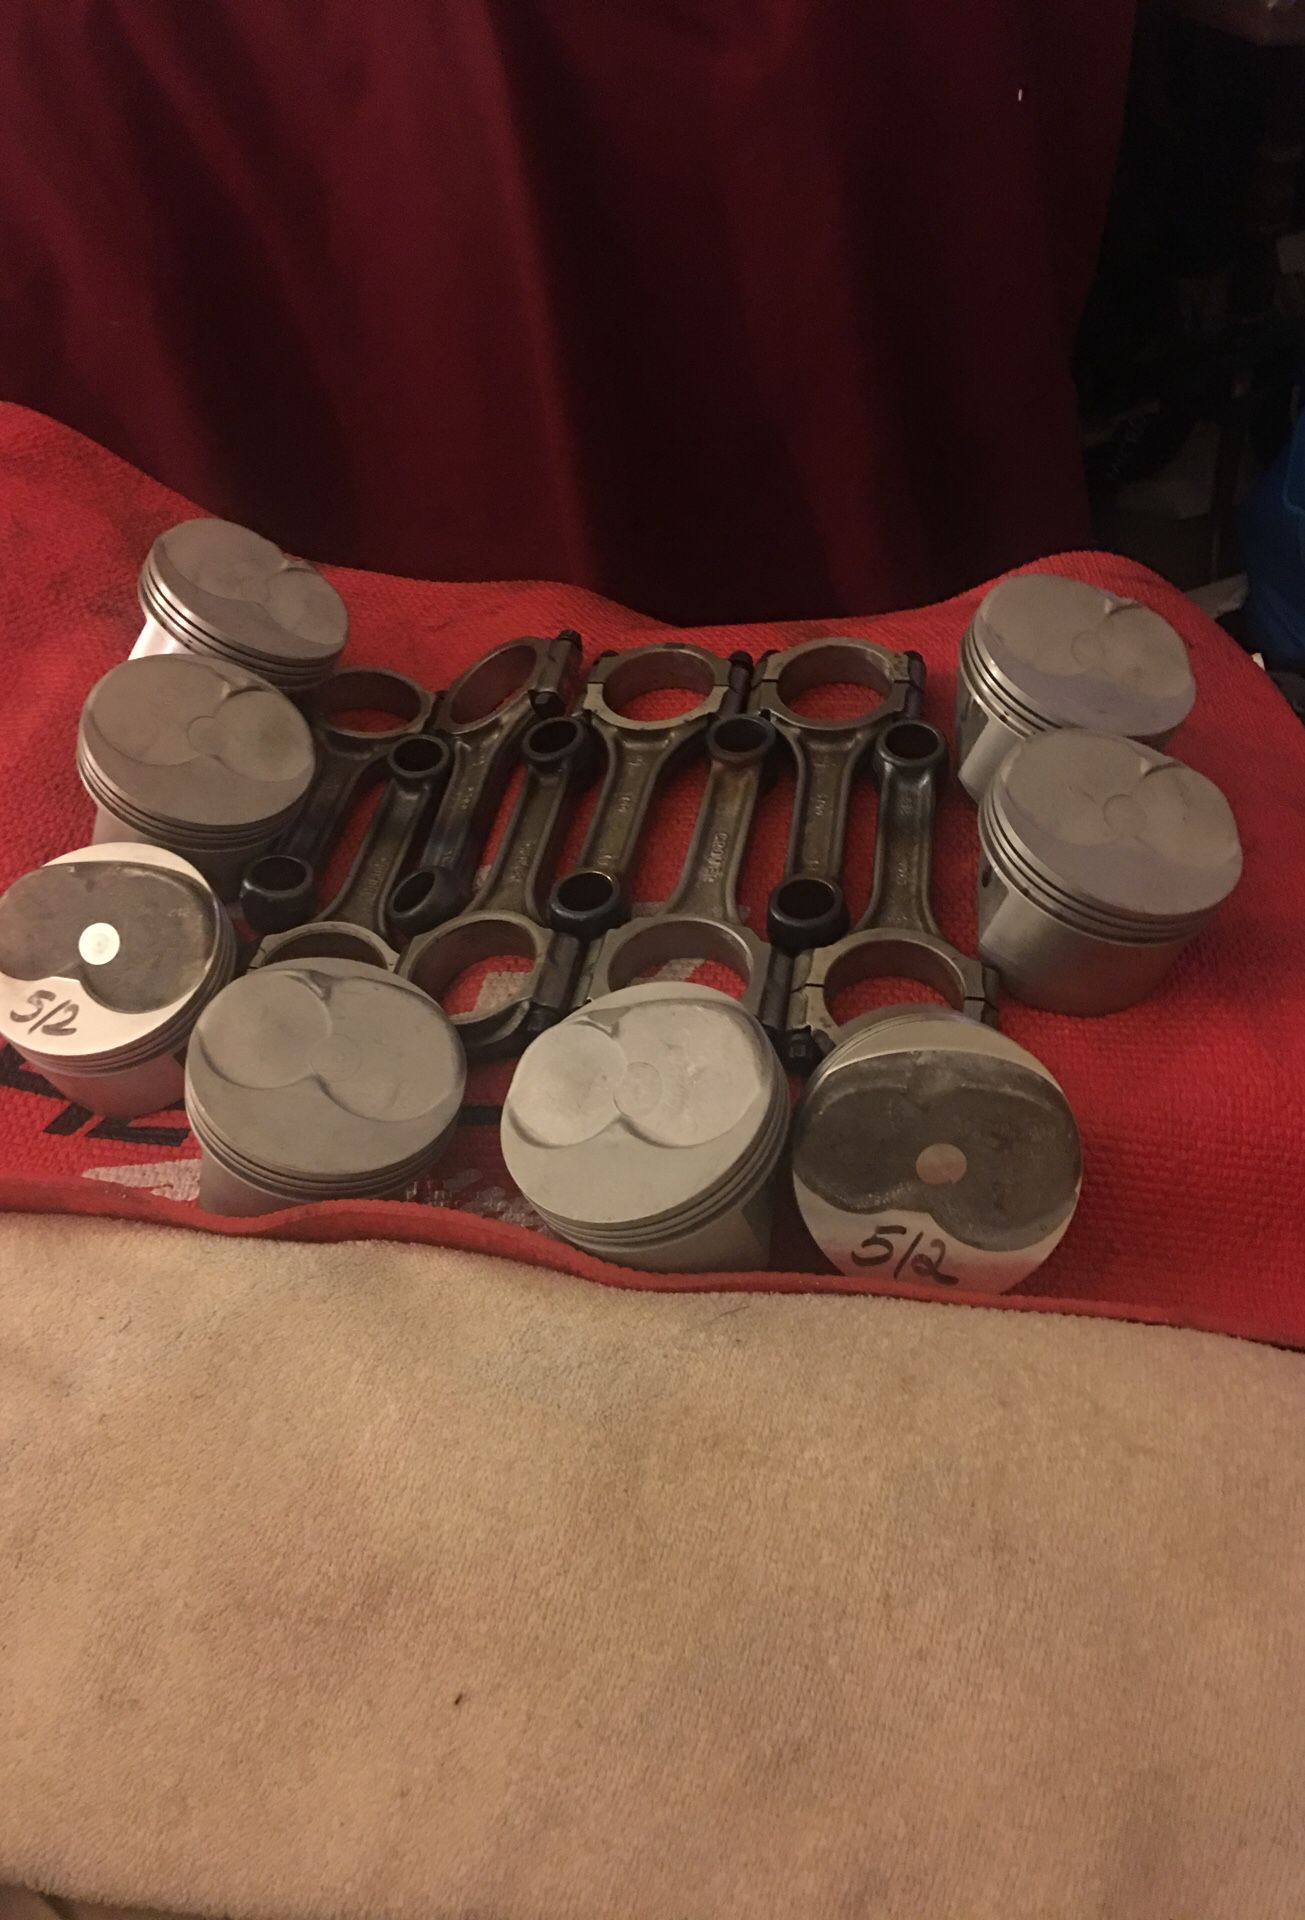 A-SET OF Manley pistons used in good condition 30-OVER 12.5to1 compression recondition rods with ARP ROD BOLT made by Crowder for small block Chevy $